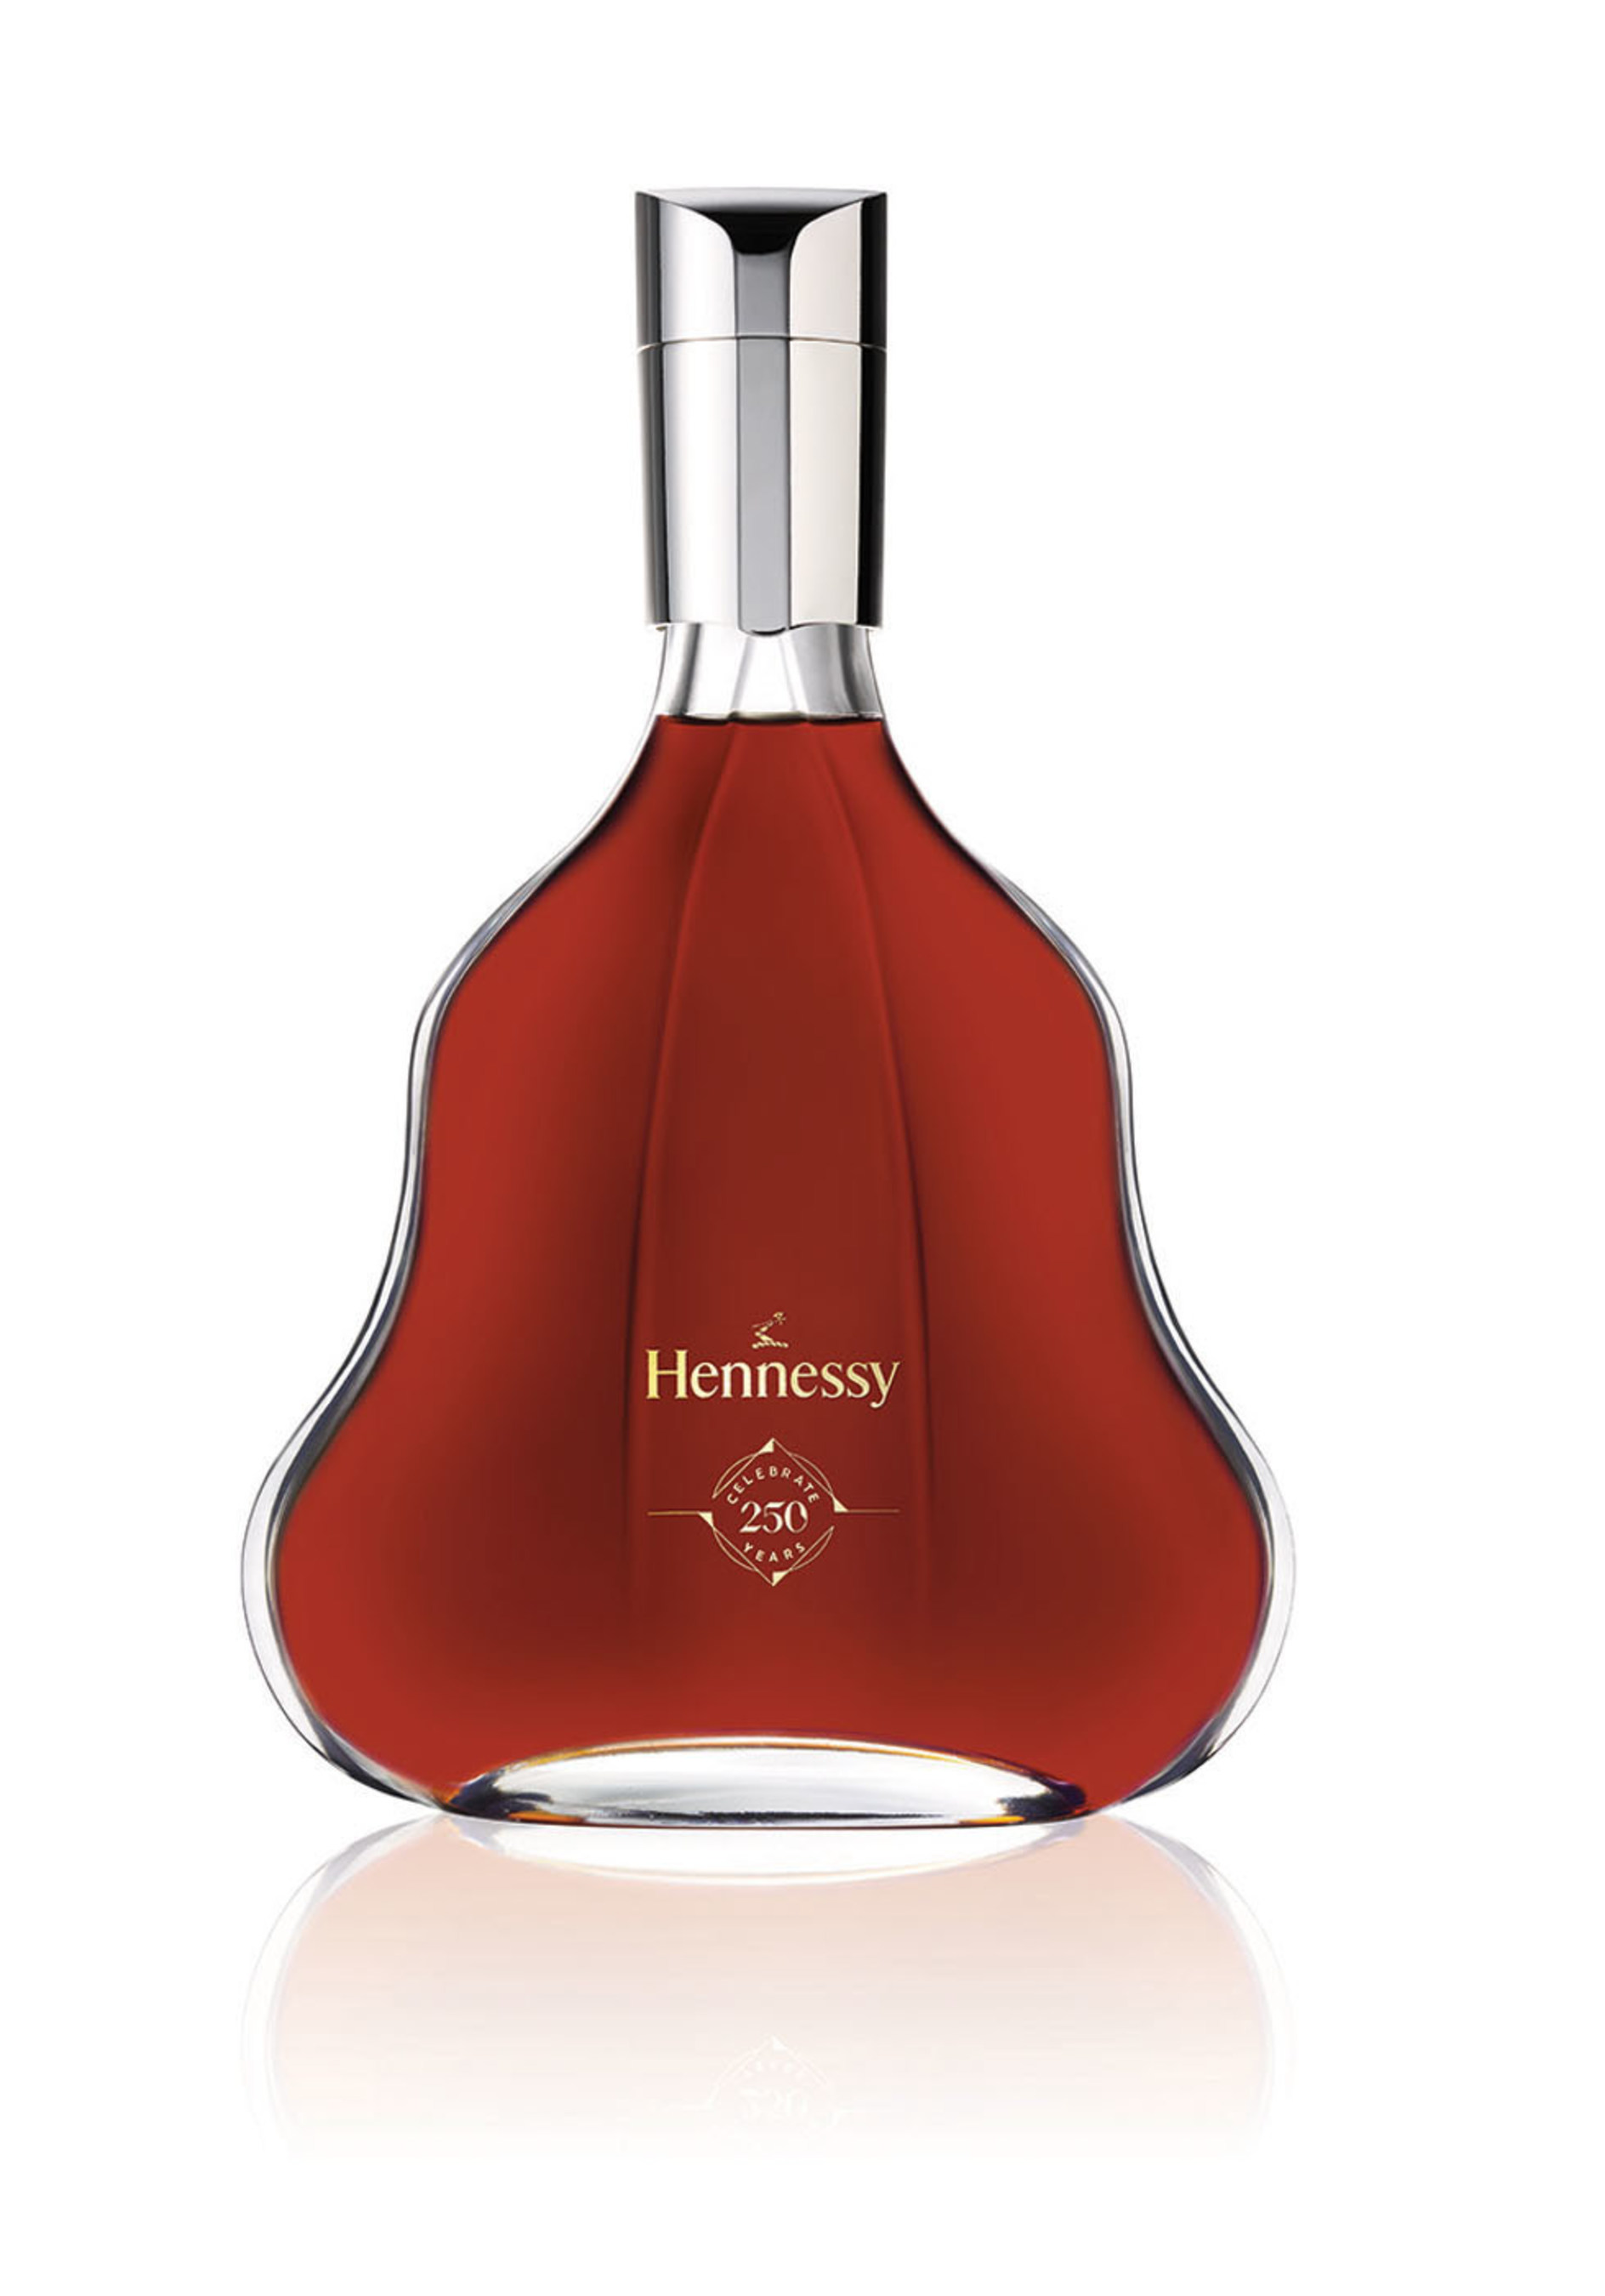 Hennessy Celebrates 250th Anniversary With Hennessy 250 Collector Blend